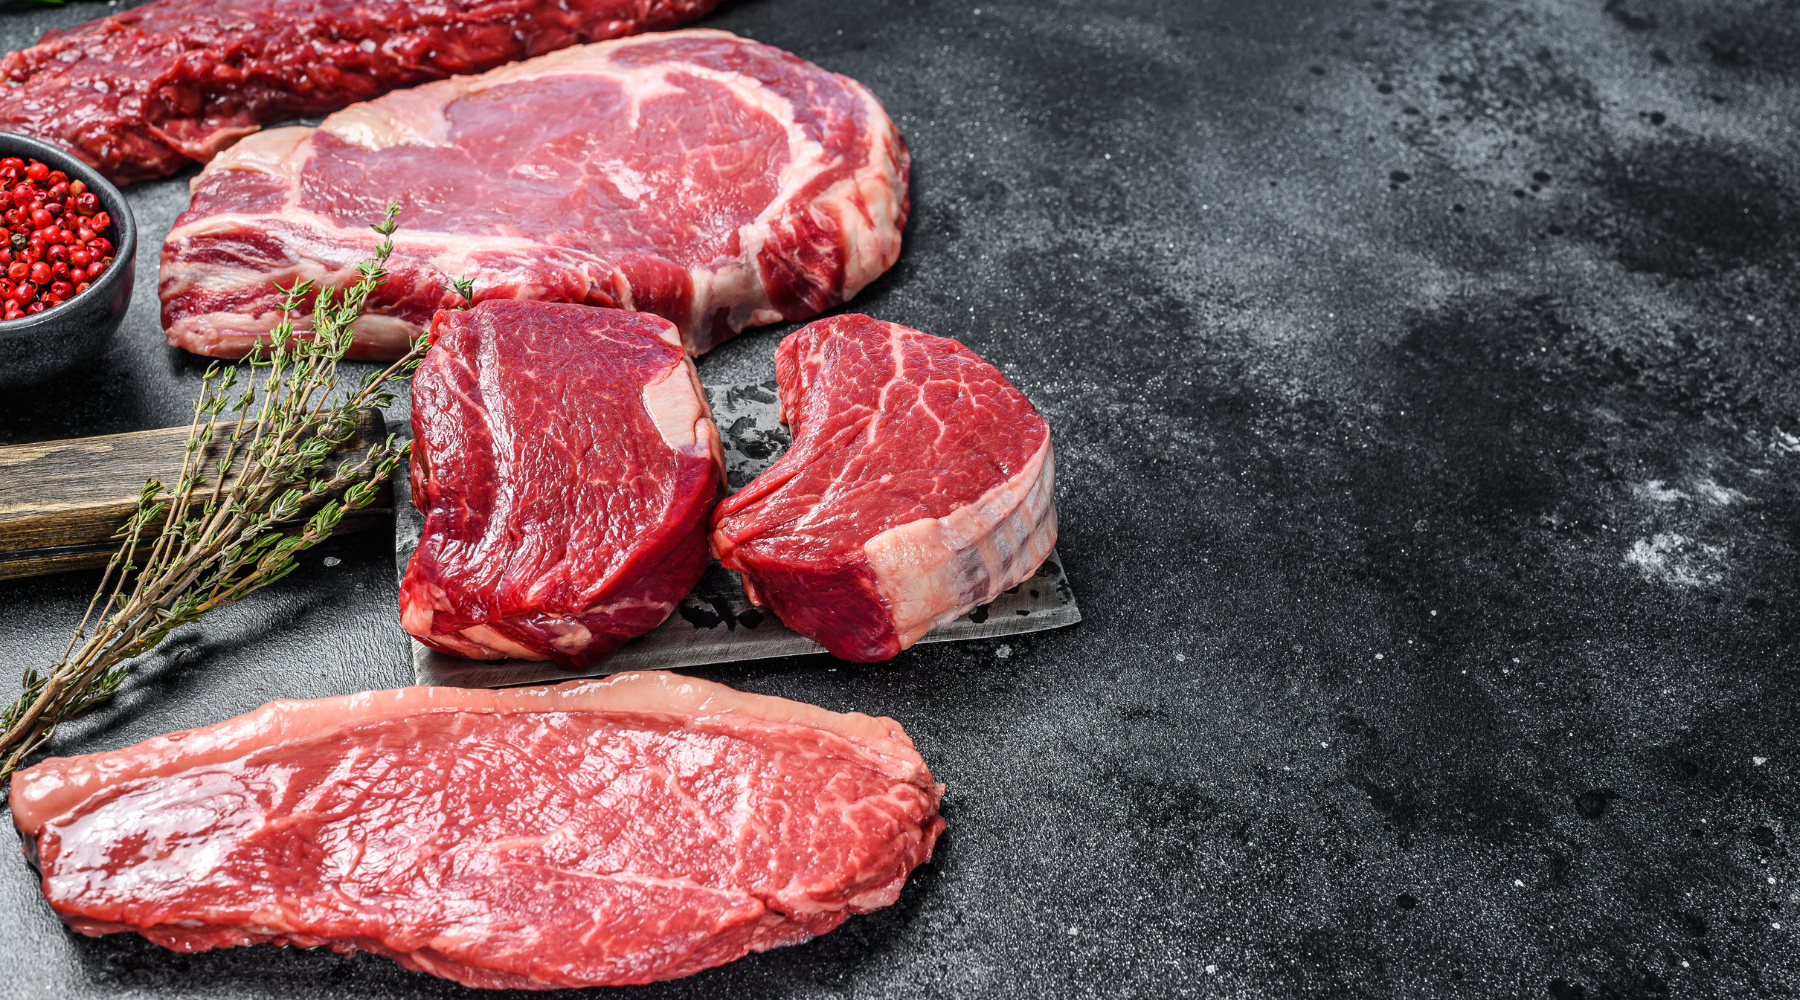 Redefining Resolutions: The Health Benefits of Red Meat